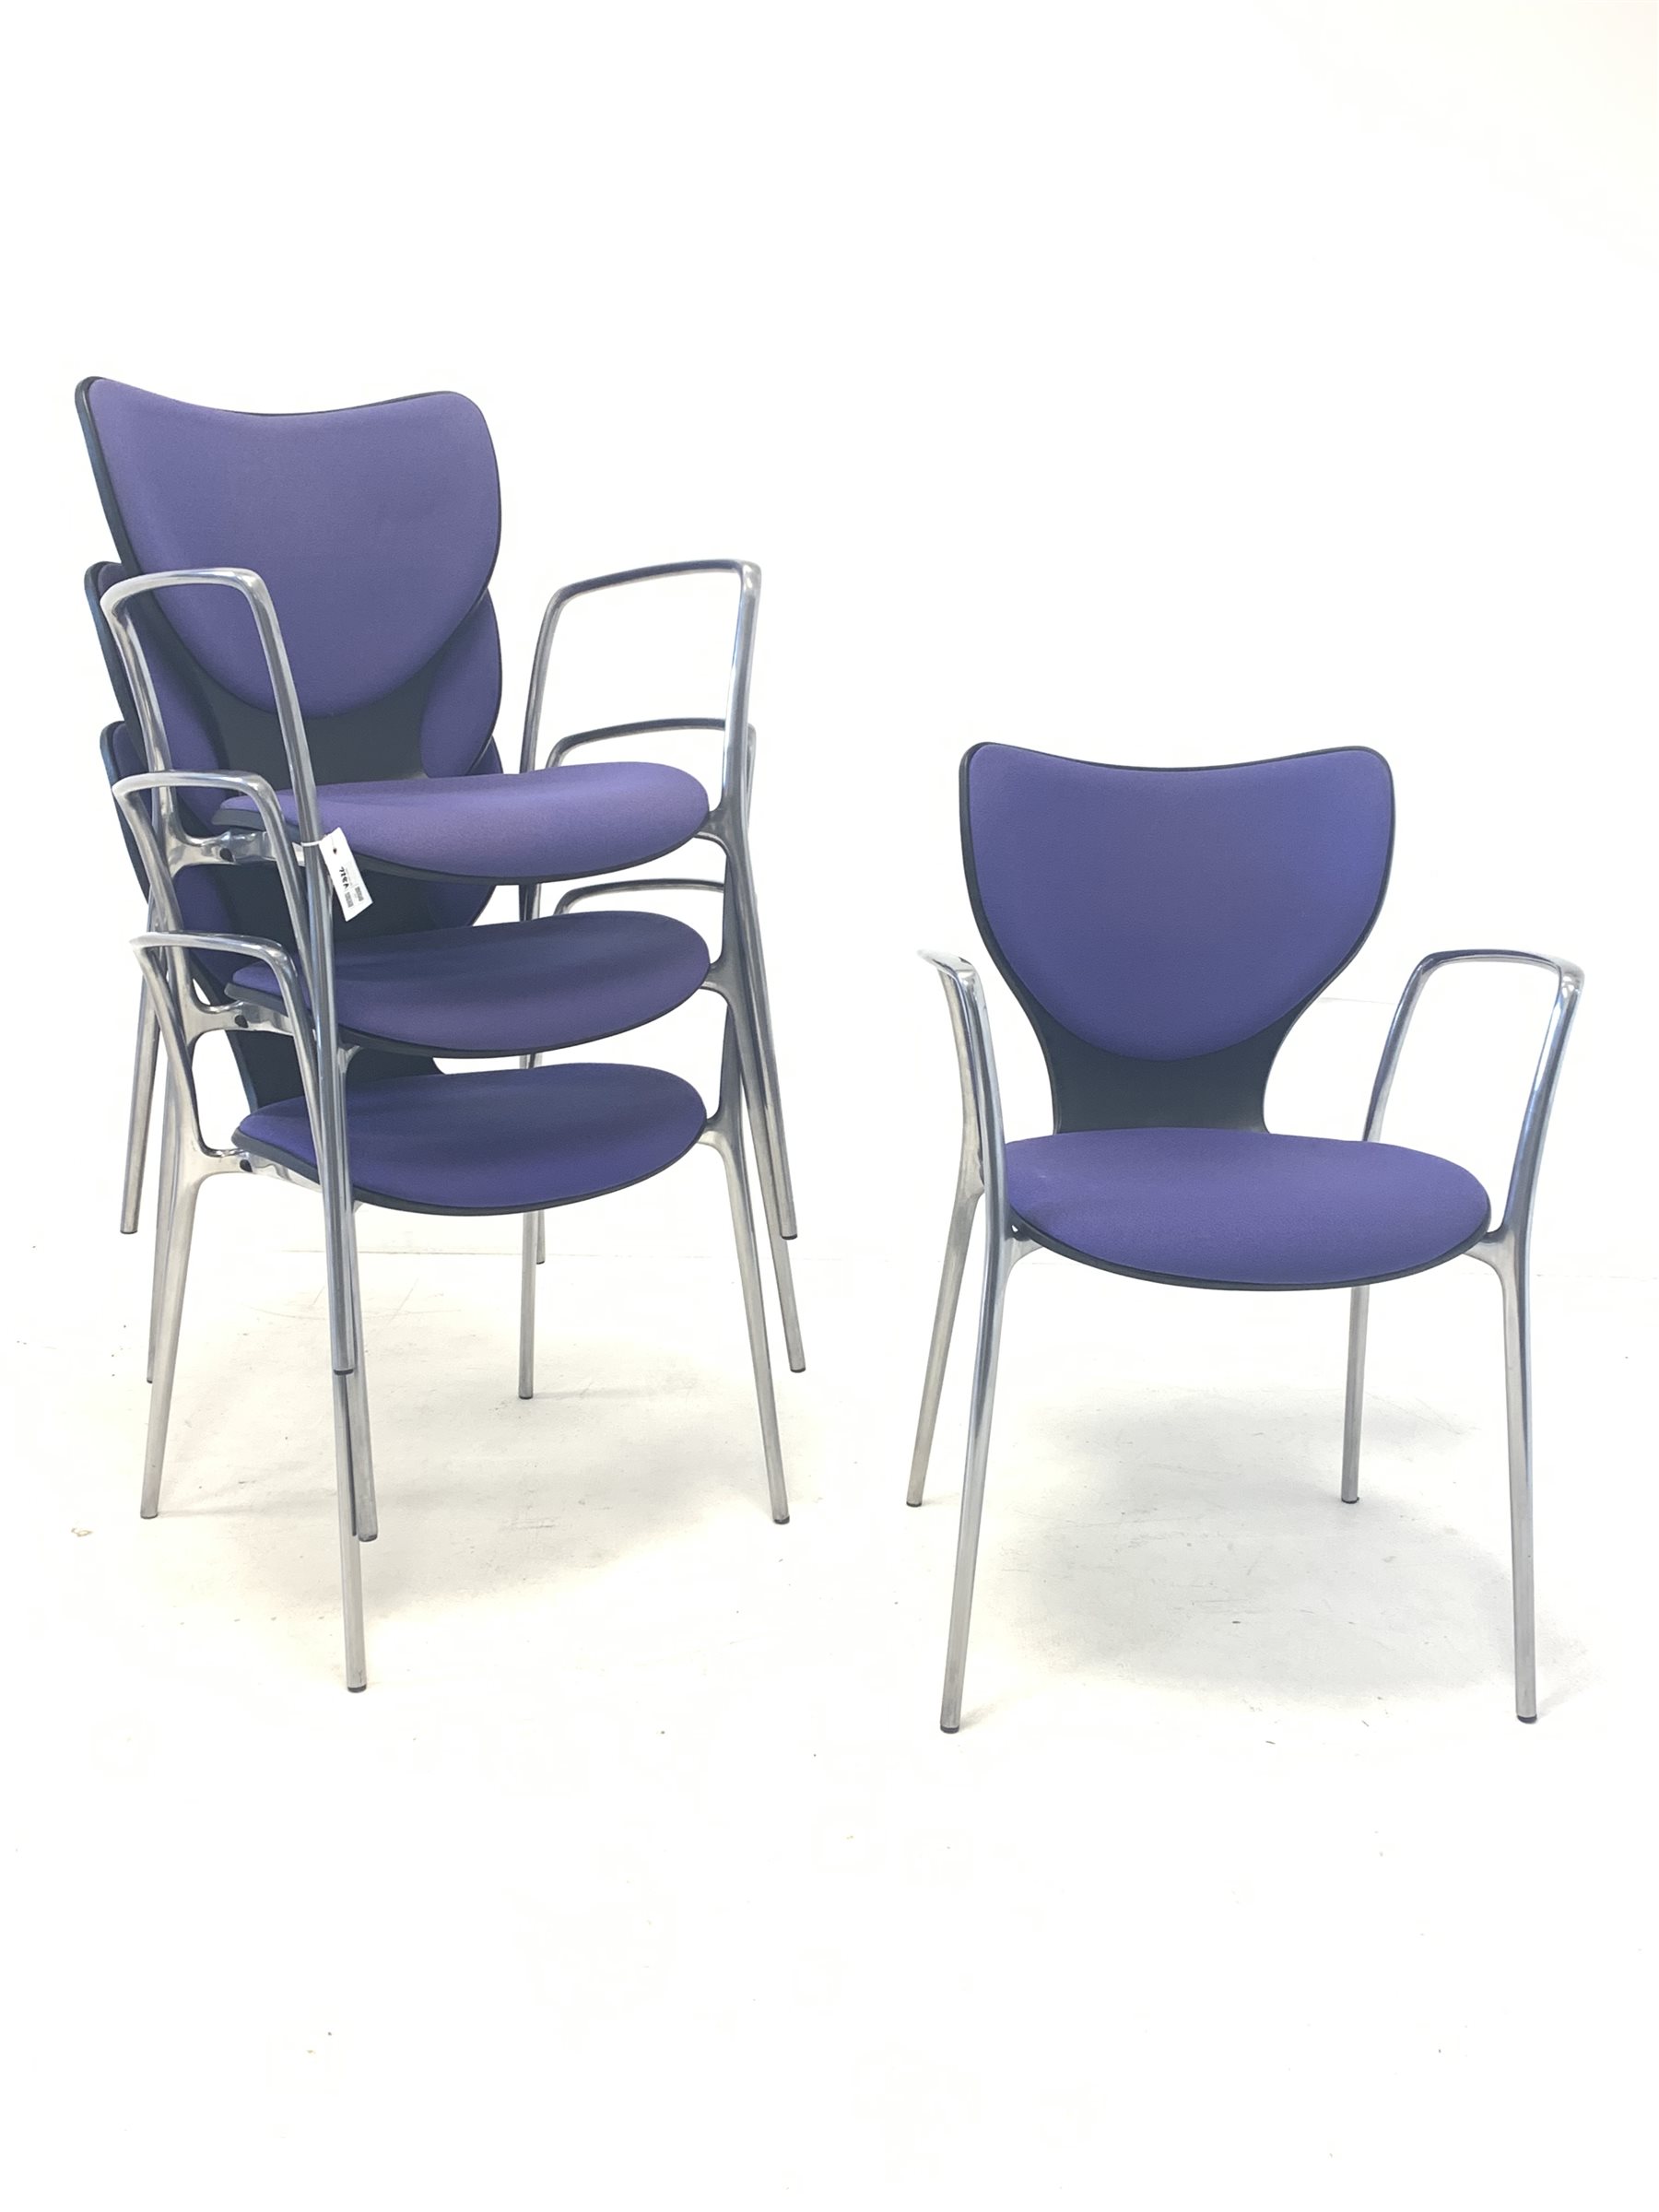 Jorge Pensi for Akaba - Set of four 'Gorka' stacking chairs with upholstered seat and back rest, rai - Image 2 of 3